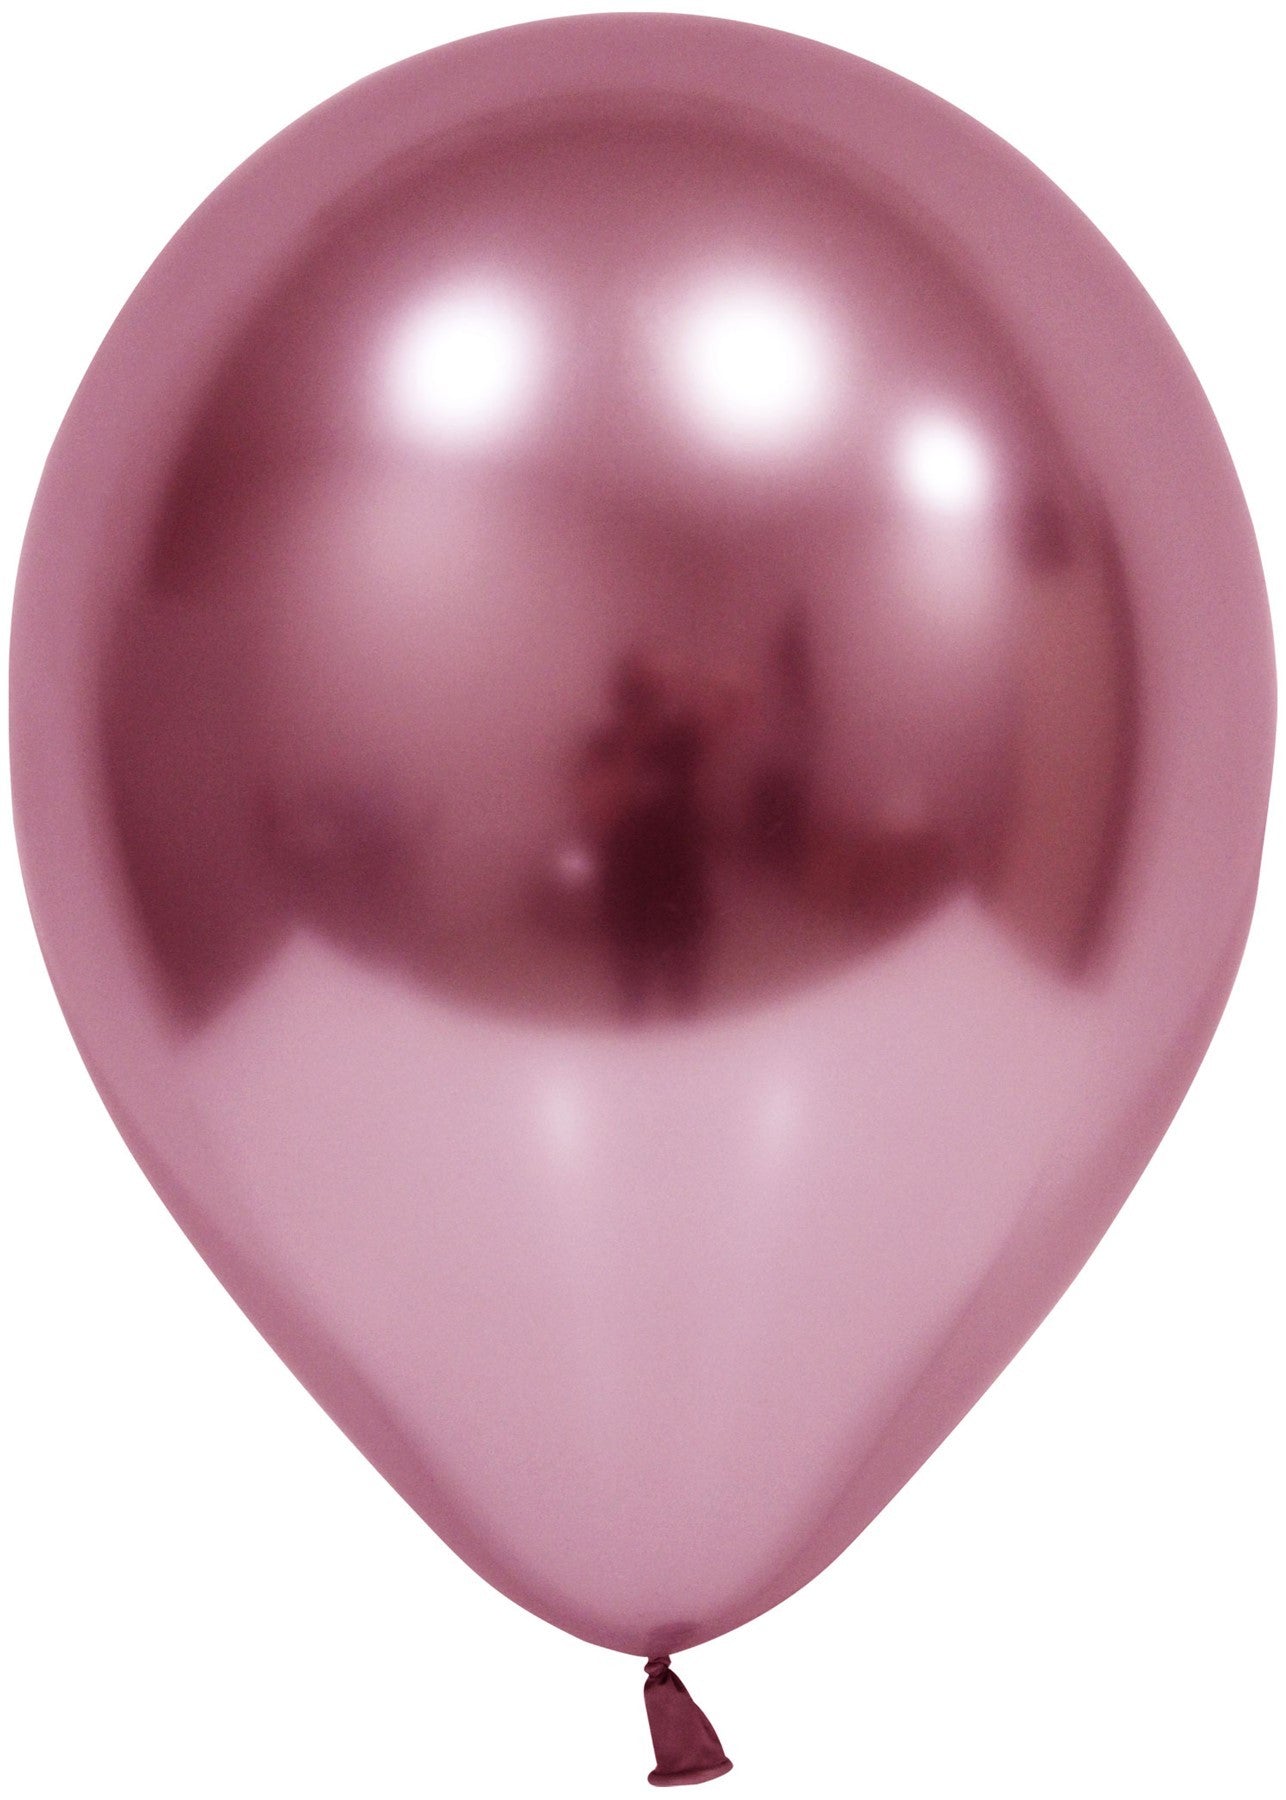 View Pink Chrome Latex Balloon 12 inch Pk 50 information